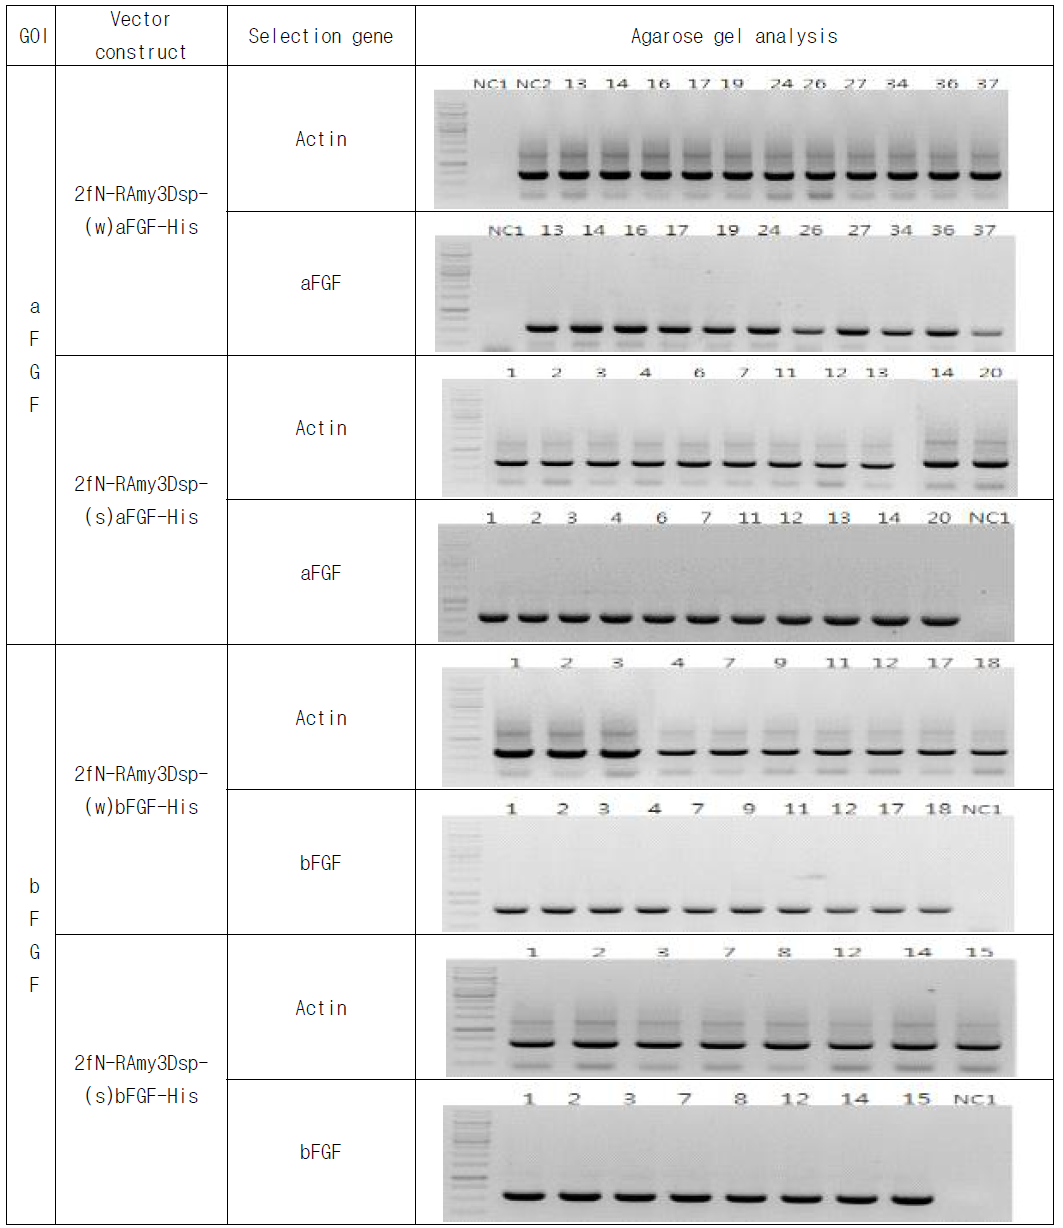 RT-PCR analysis of transgenic plant expressing 2fN-RAmy3Dsp-a/bFGF(wt)-His, 2fN-RAmy3Dsp-(s)a/bFGF-His